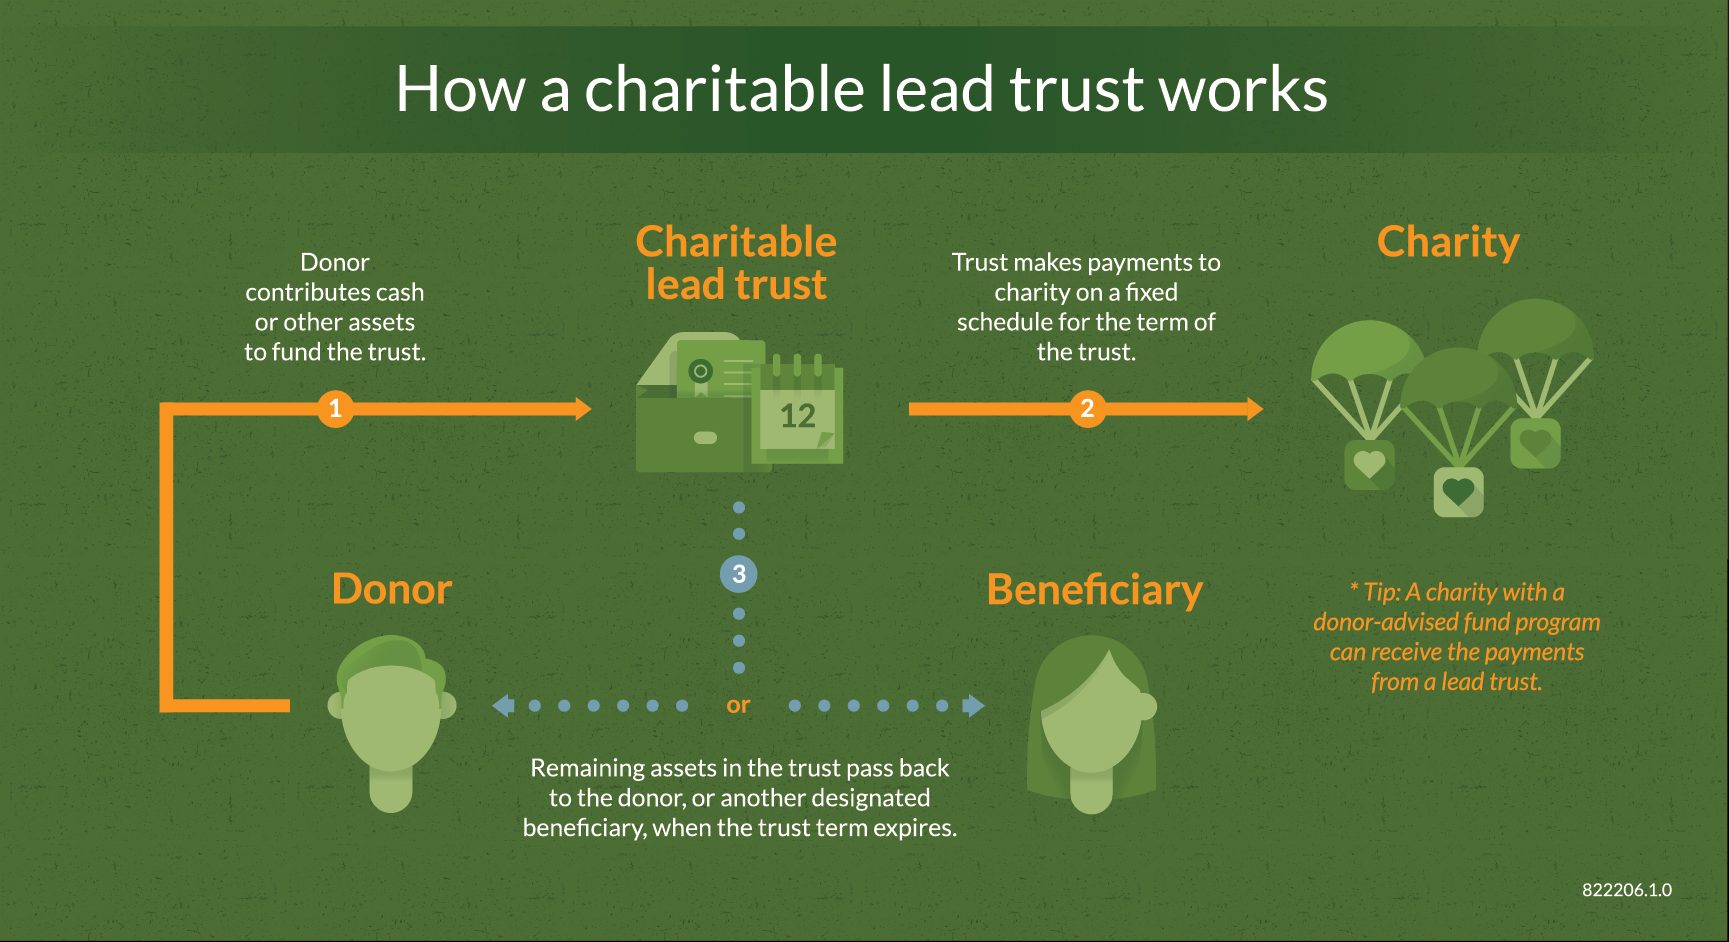 Illustration describing how a charitable lead trust works